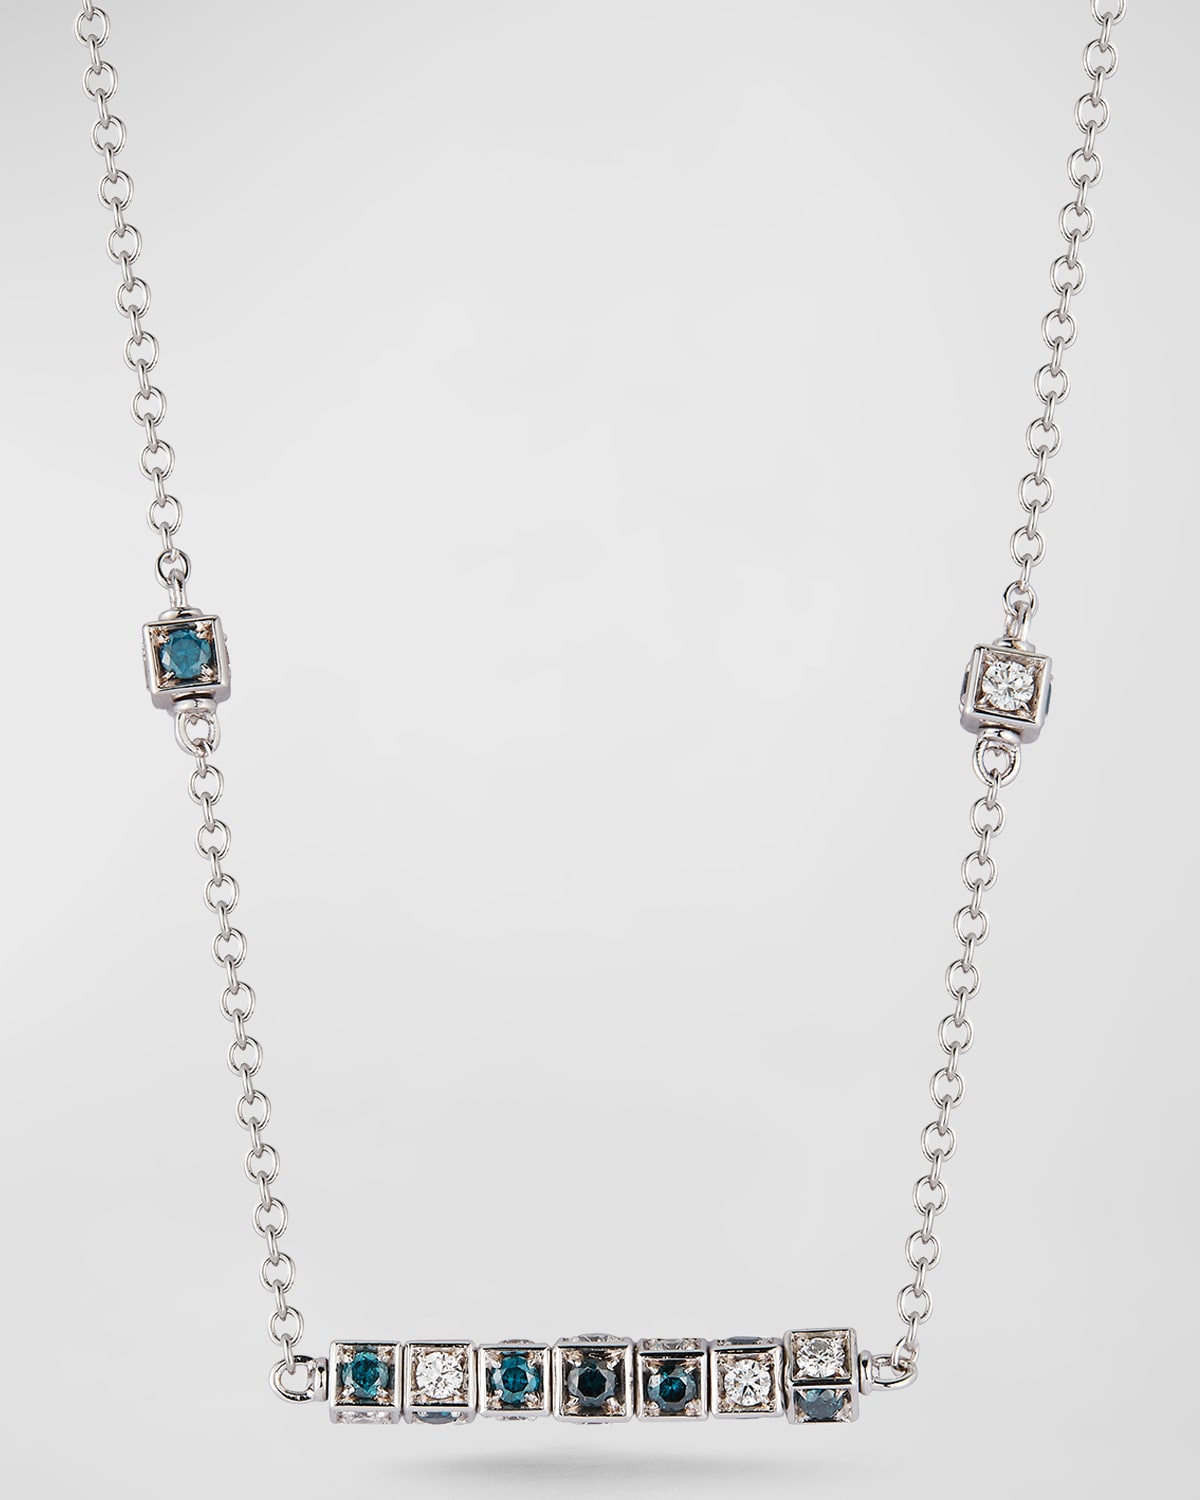 18k White Gold Blue and White Diamond Cube Long Bar Necklace